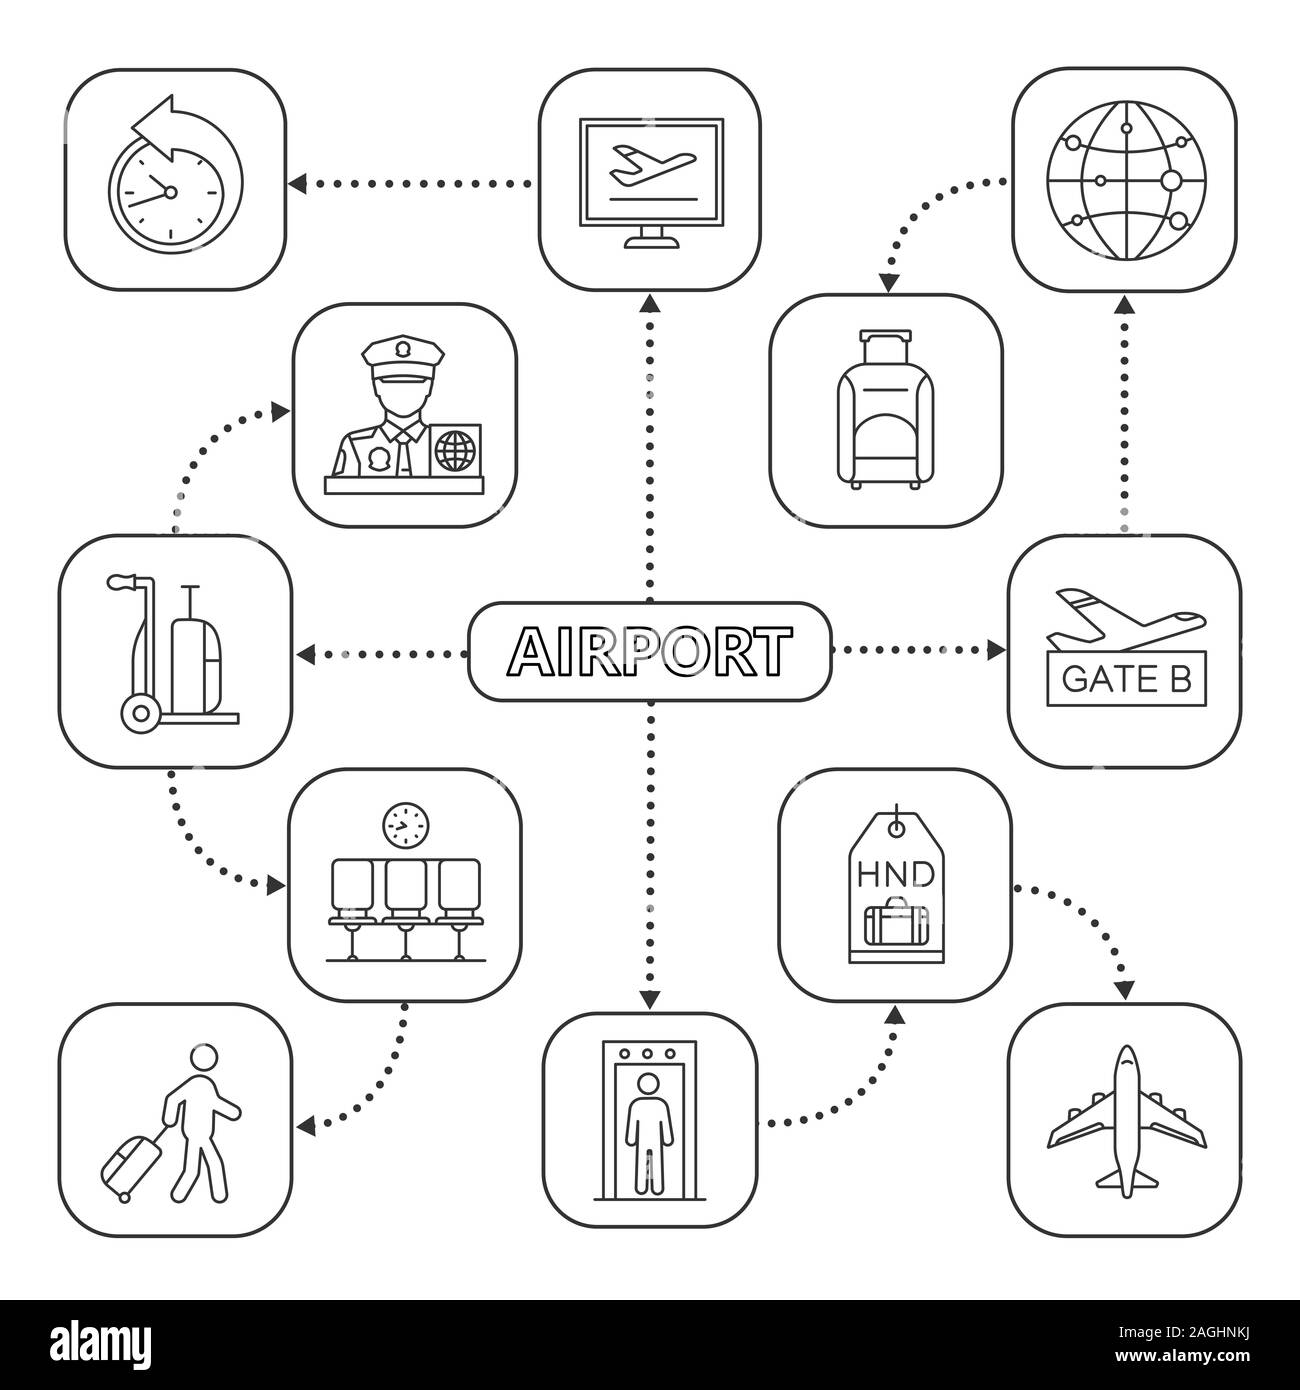 Airport service mind map with linear icons. Plane, passport control, baggage check, tickets, airport security, passenger. Concept scheme. Isolated vec Stock Vector